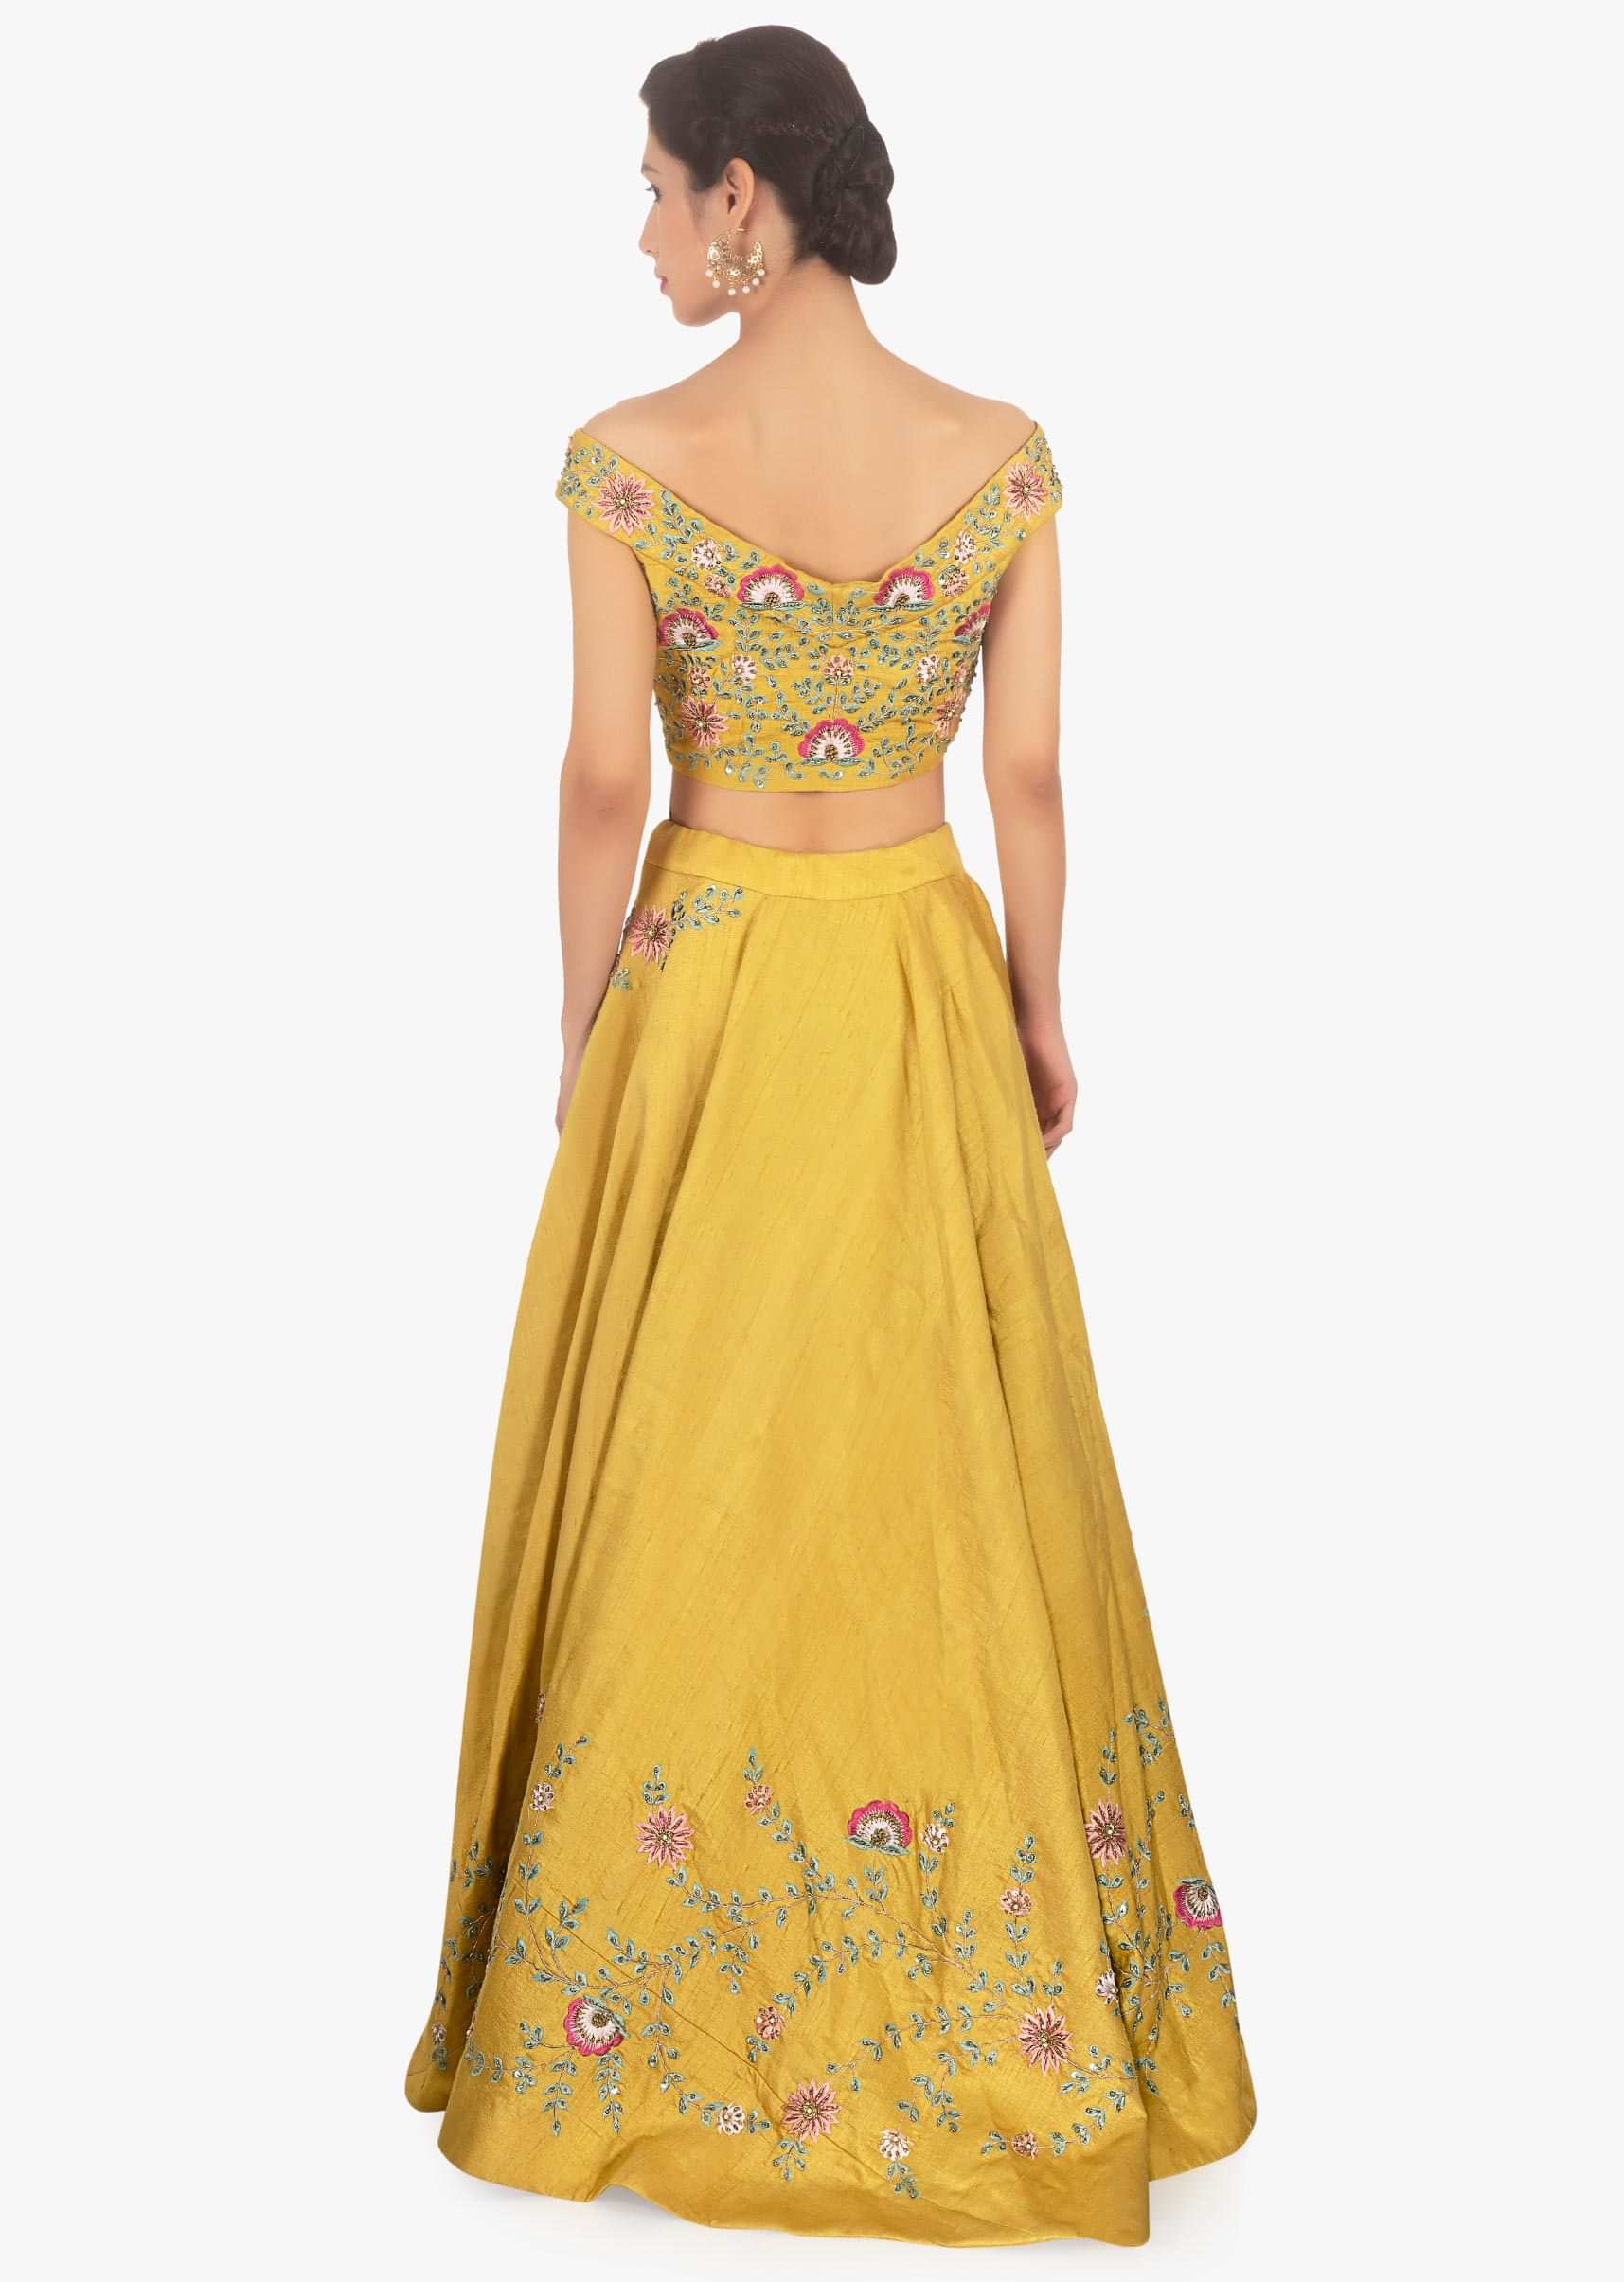 Mustard raw silk lehenga and blouse paired with pink net dupatta 